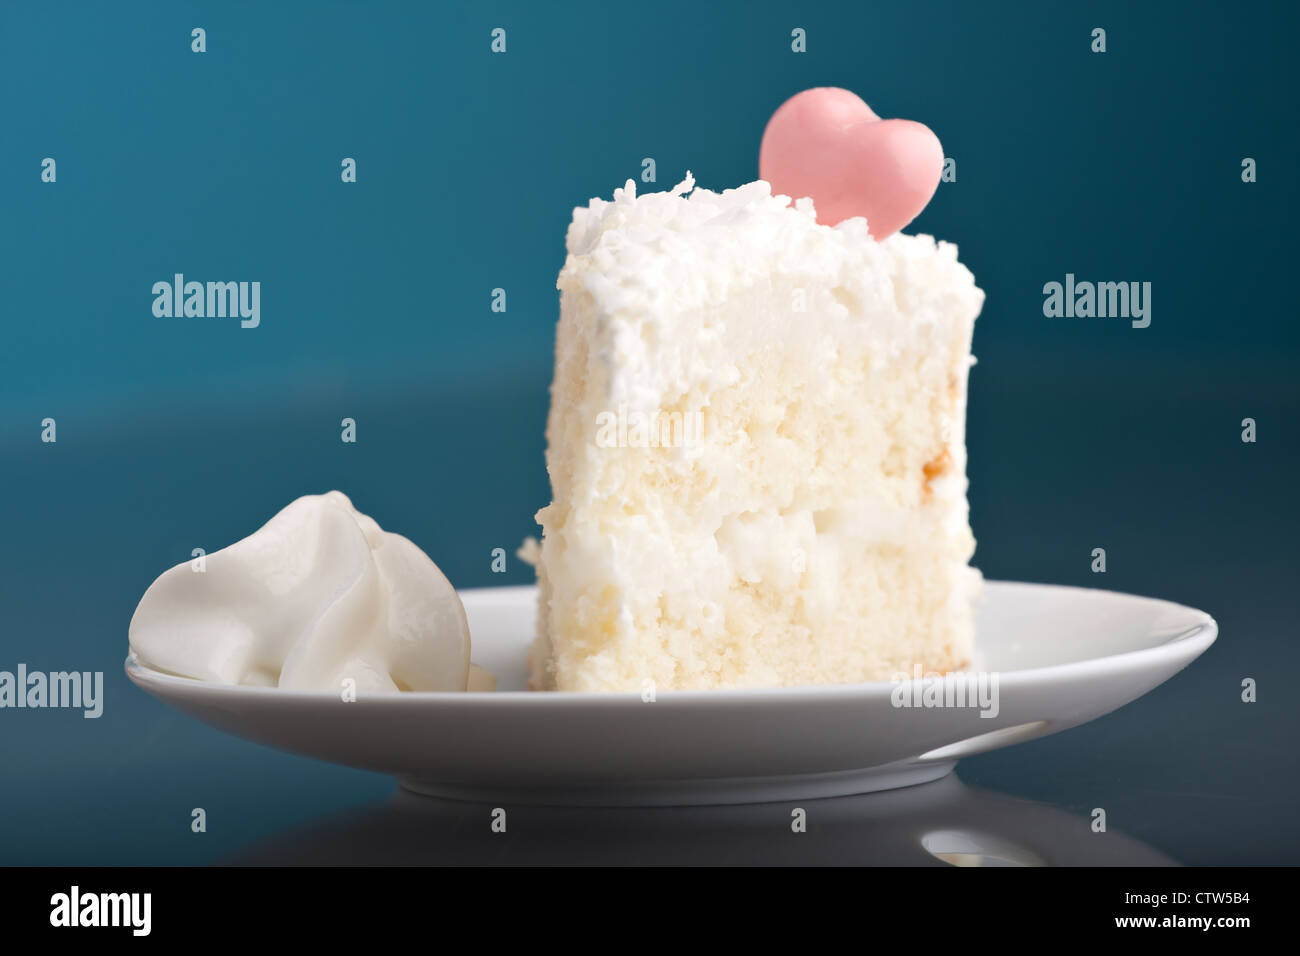 A fresh piece of coconut cream cake on a white plate with a bit of whipped cream on the side. Stock Photo